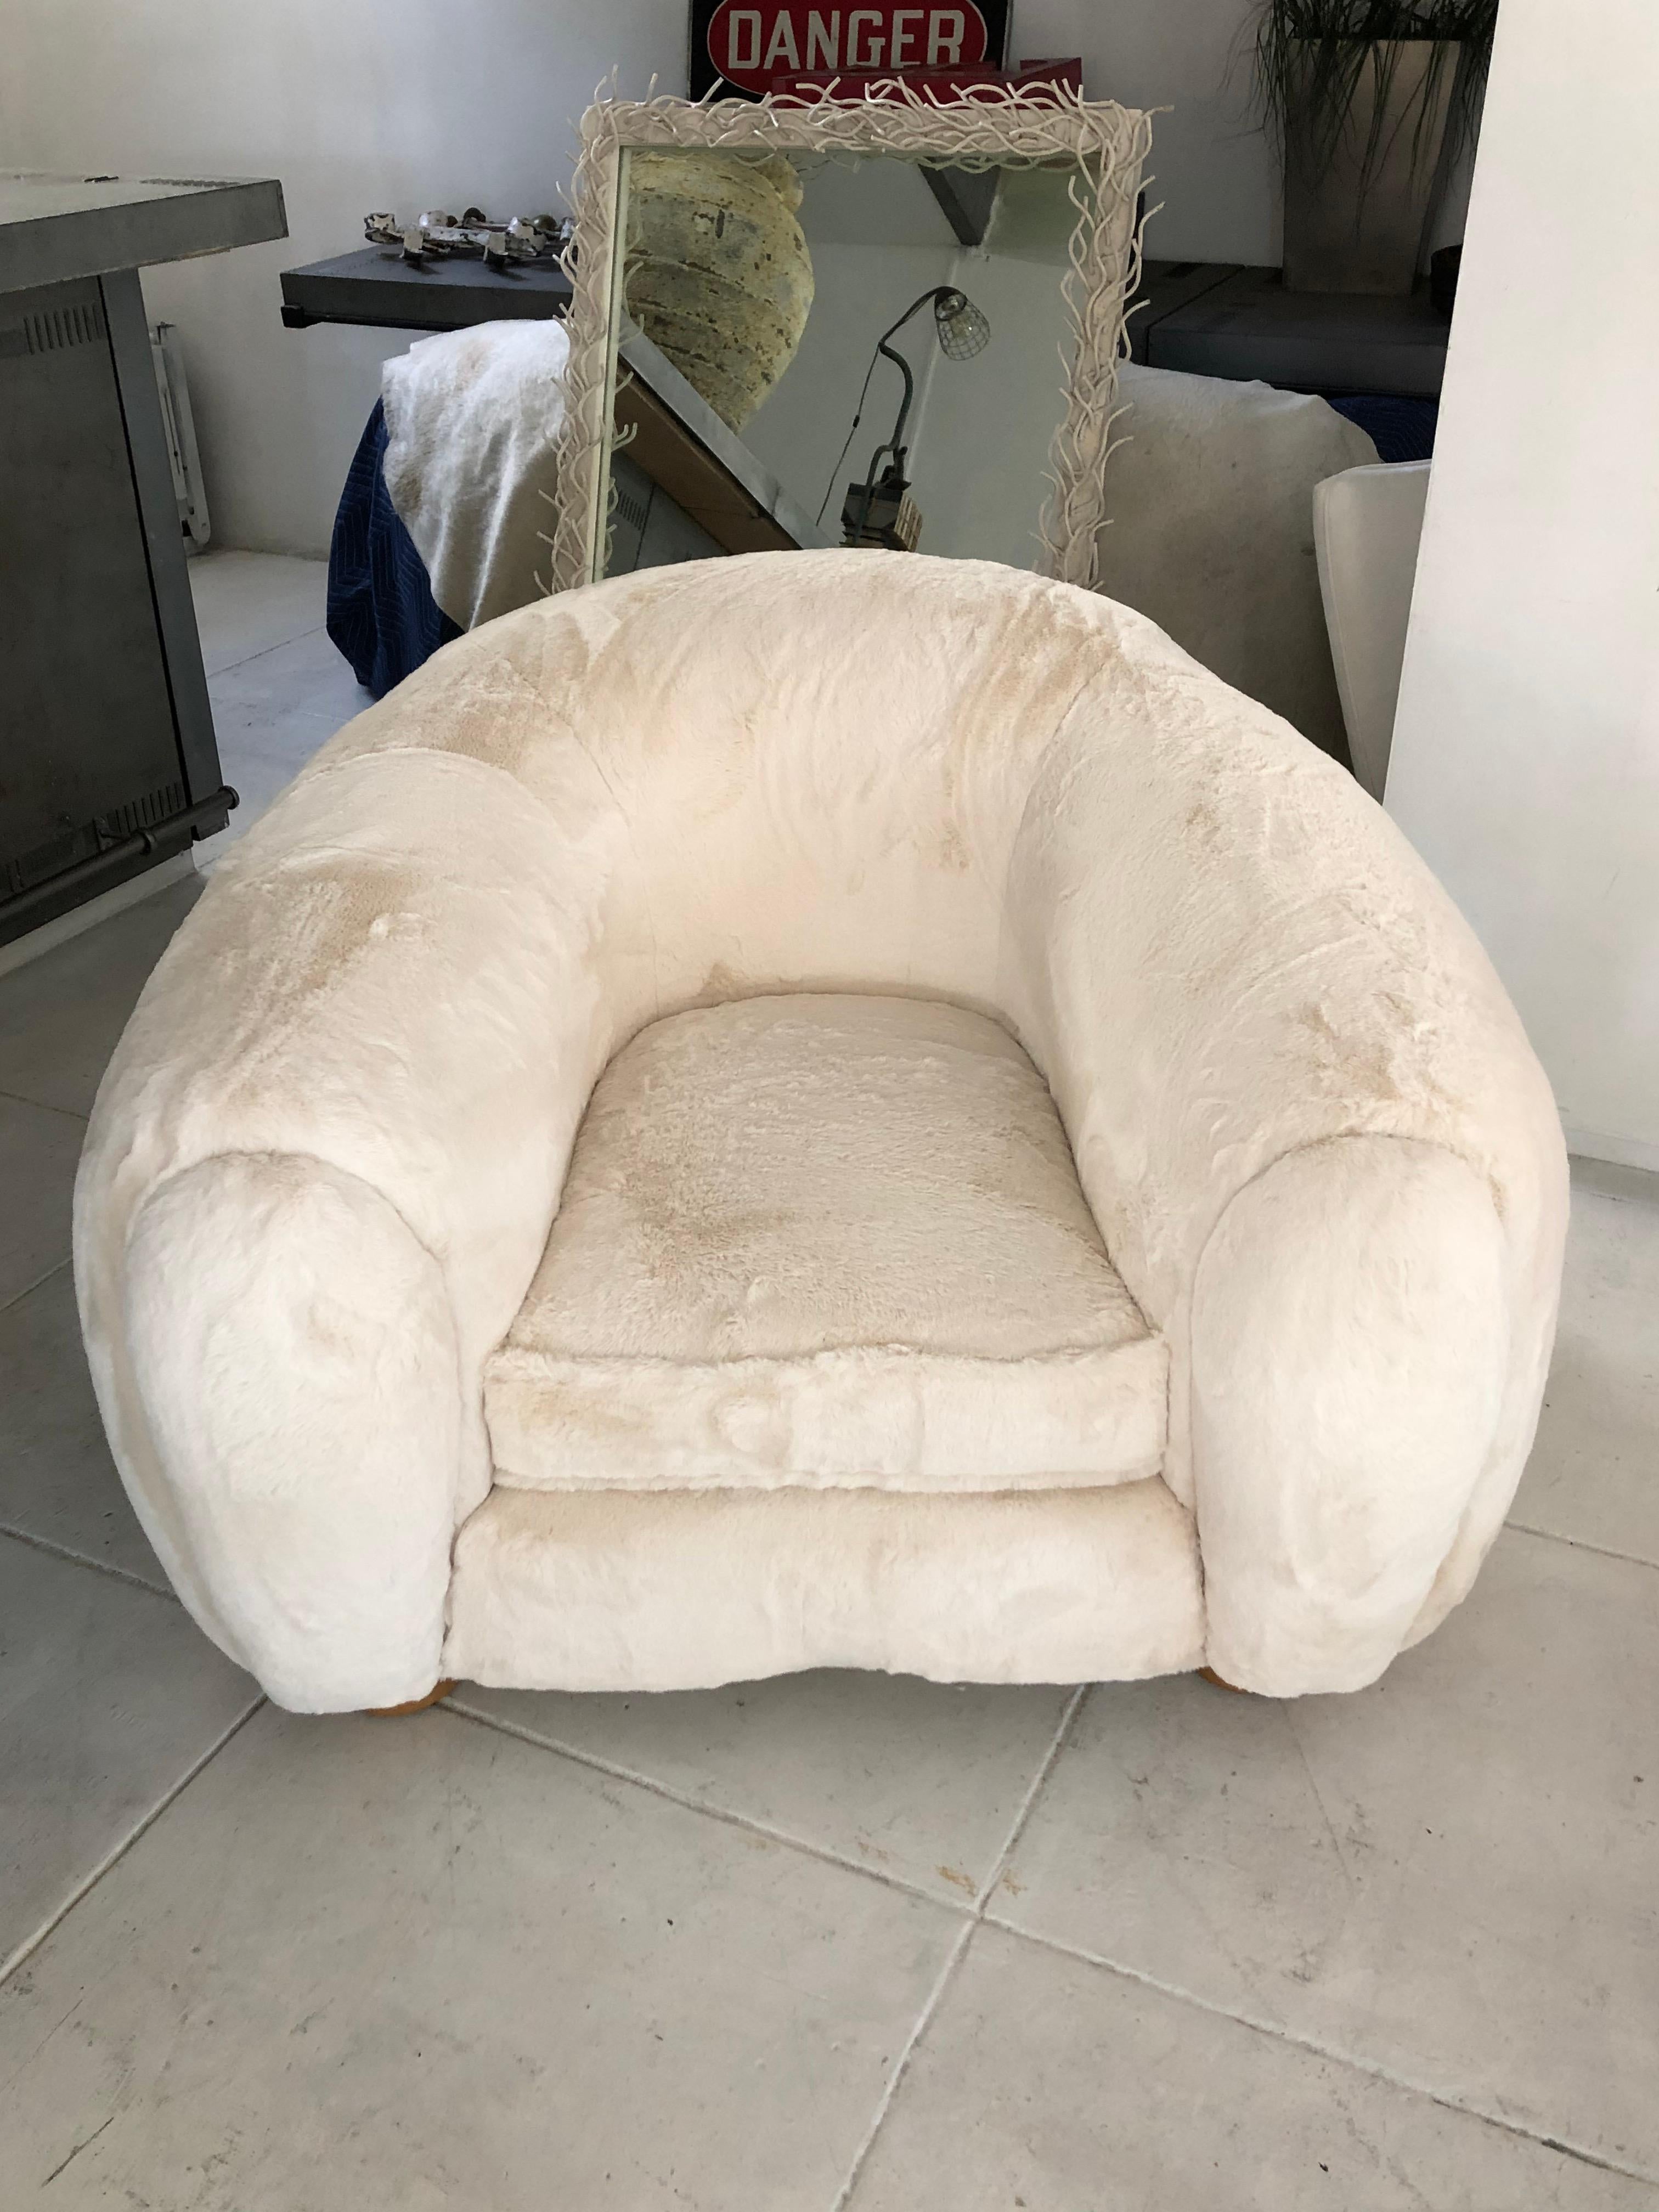 Exceptional 1950s chair after Jean Royere, recently upholstered with off-white shearling fabric.
Provenance: Purchased in France from a closed-down hotel.